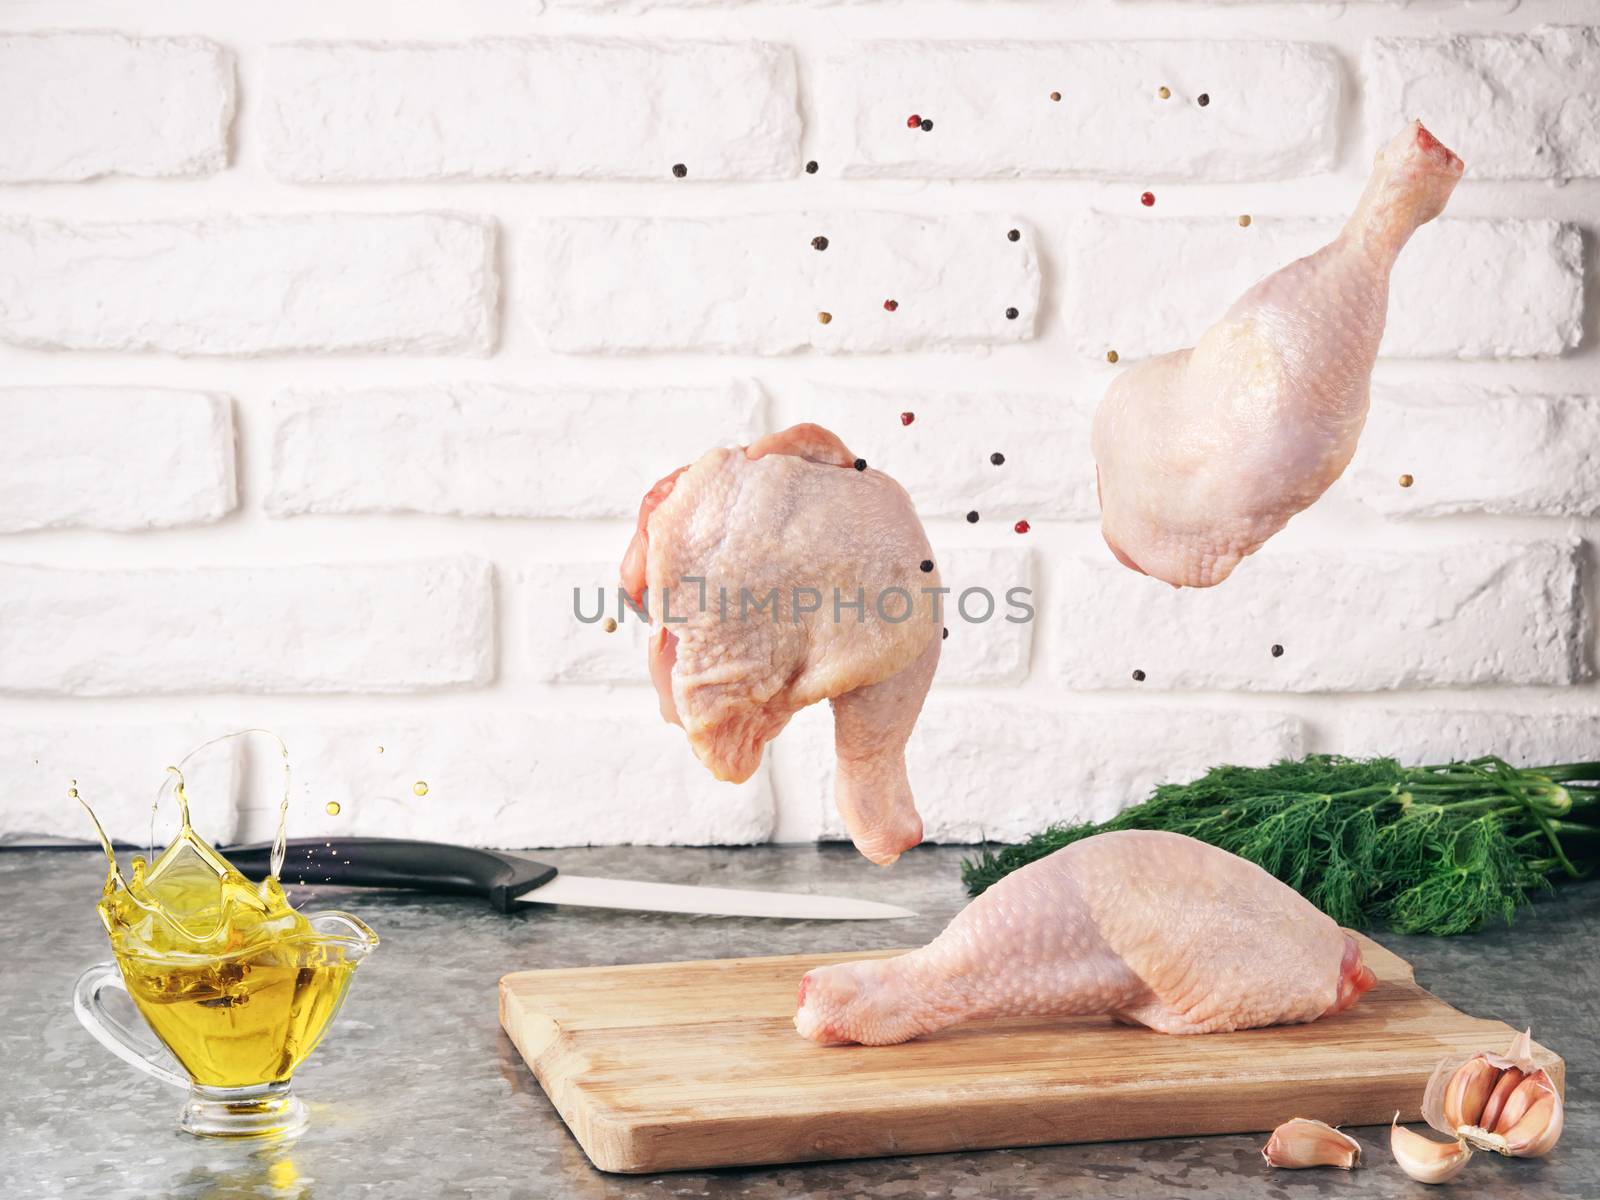 Raw chicken legs levitation. Flying food. Concept for food ingredient. Copy space